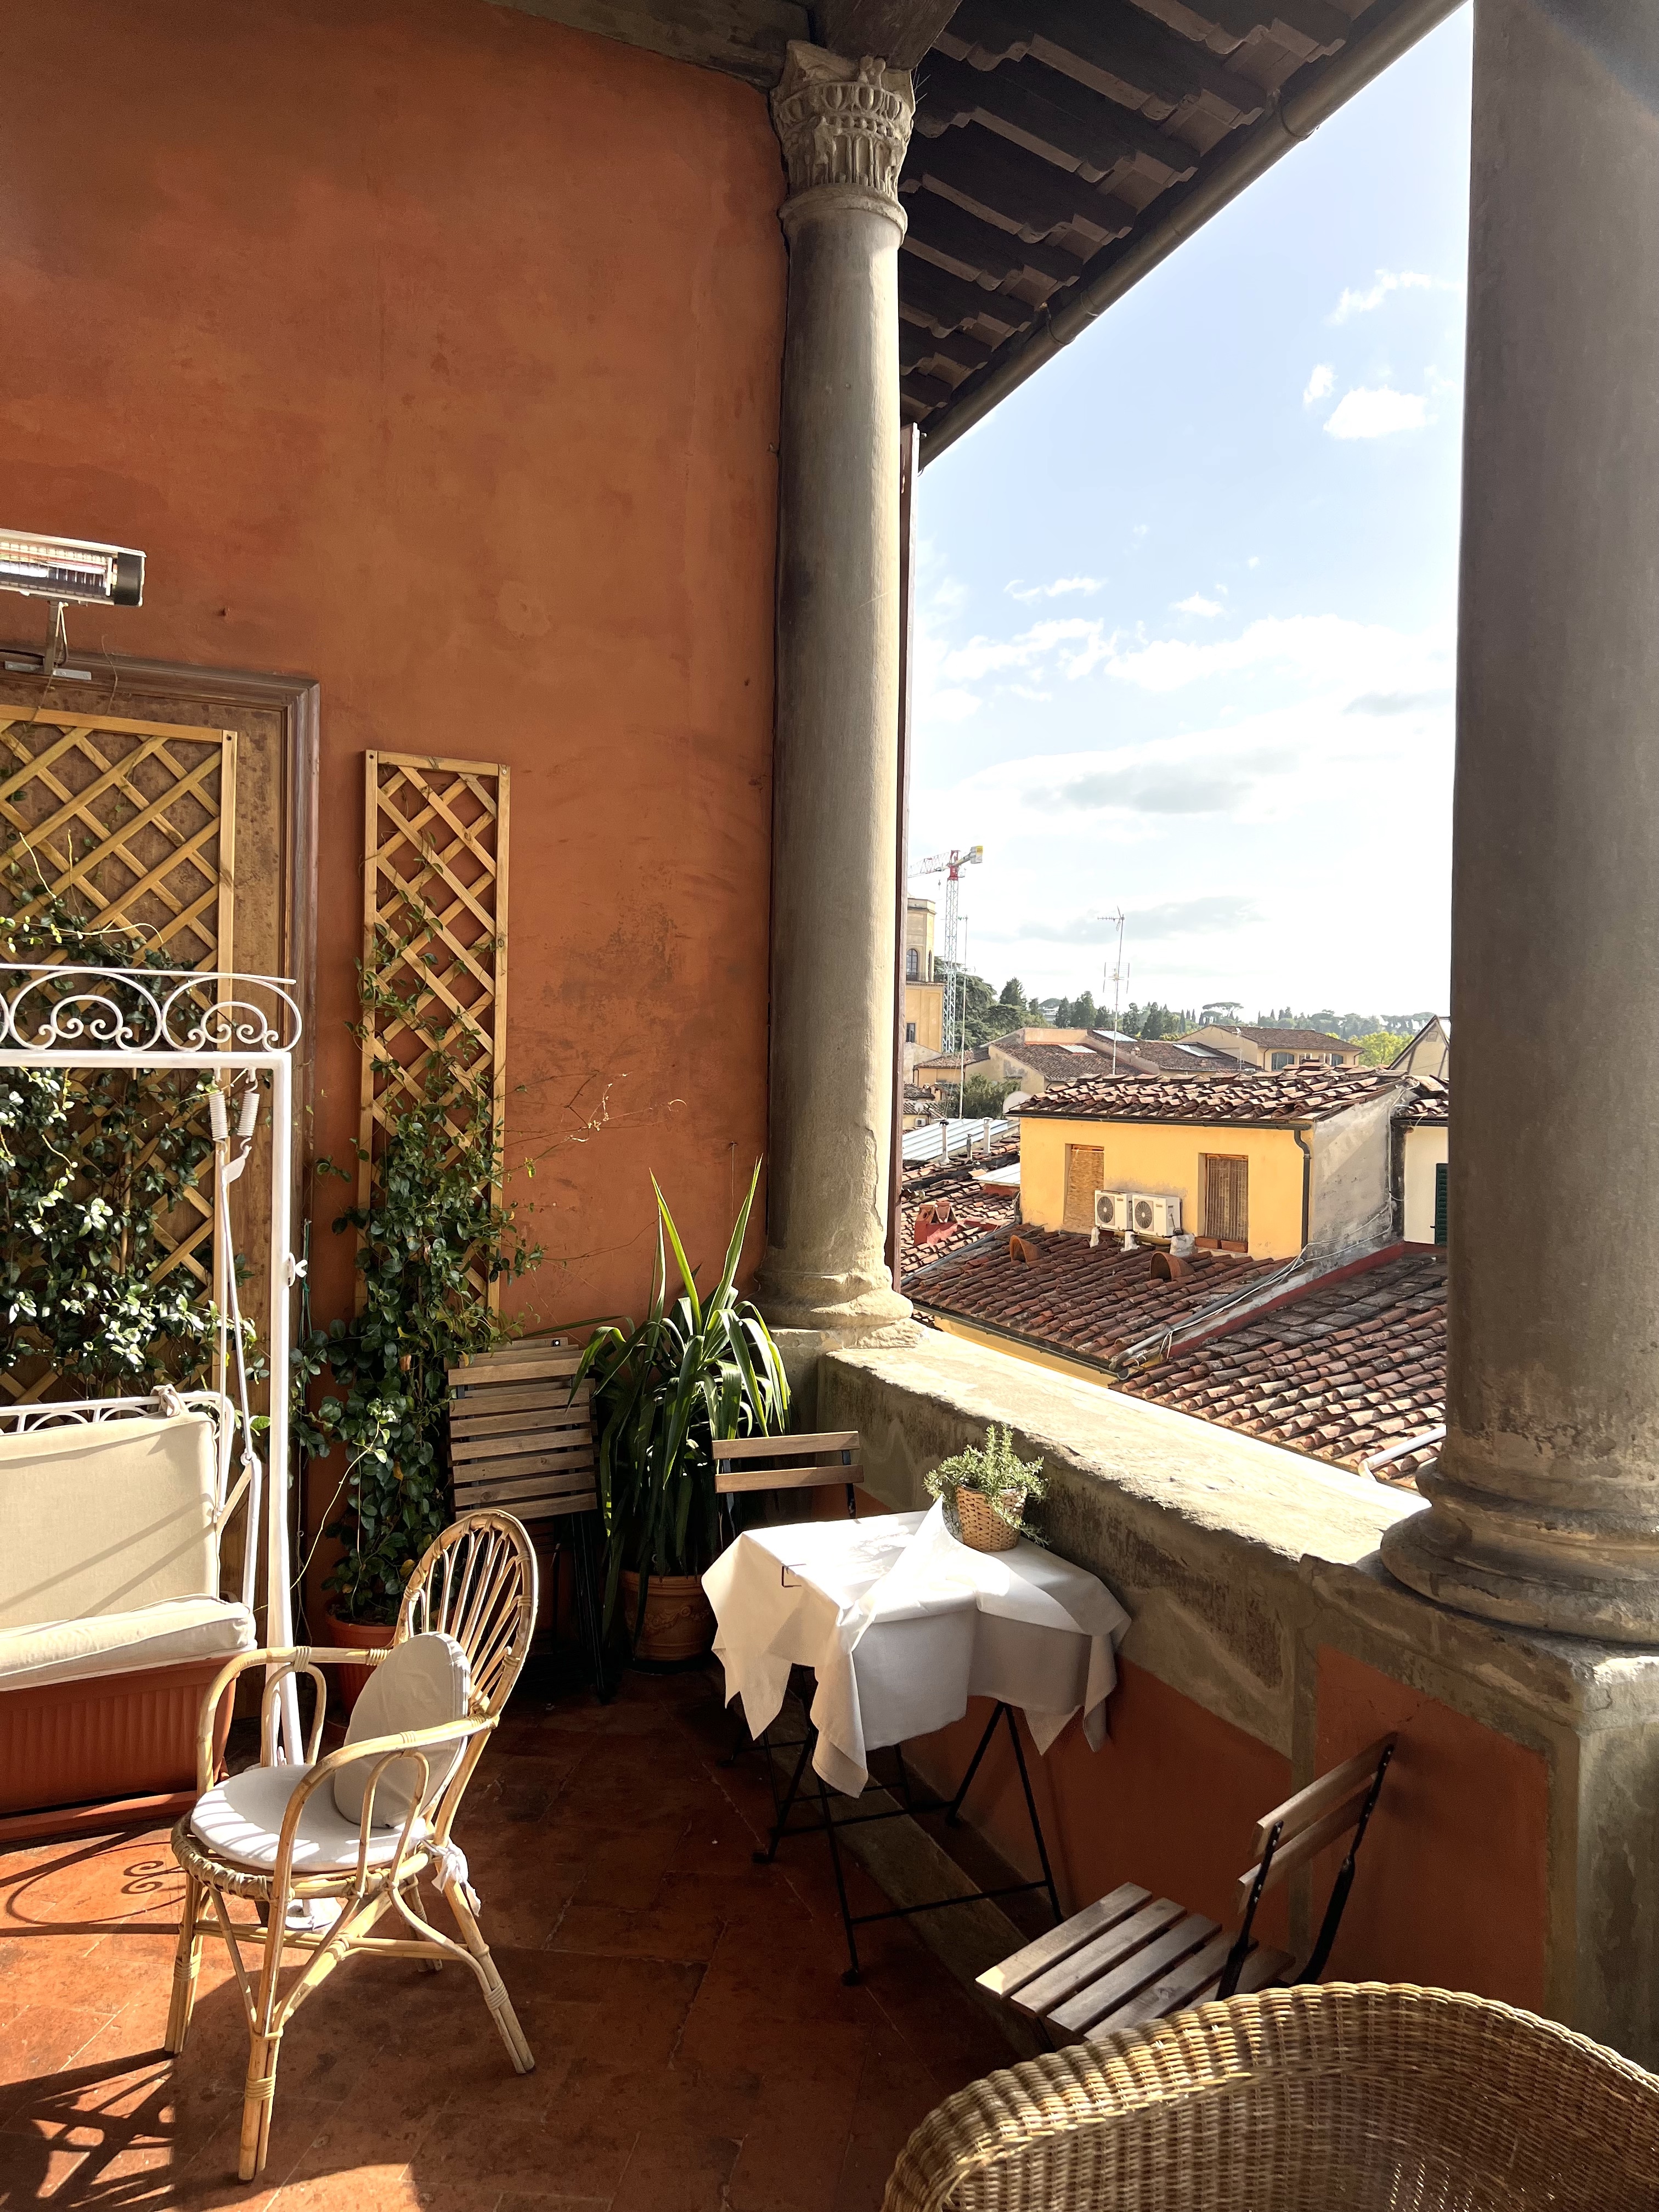 So simple, yet so beautiful. The terrace at Hotel Palazo Guadagni, Firenze.